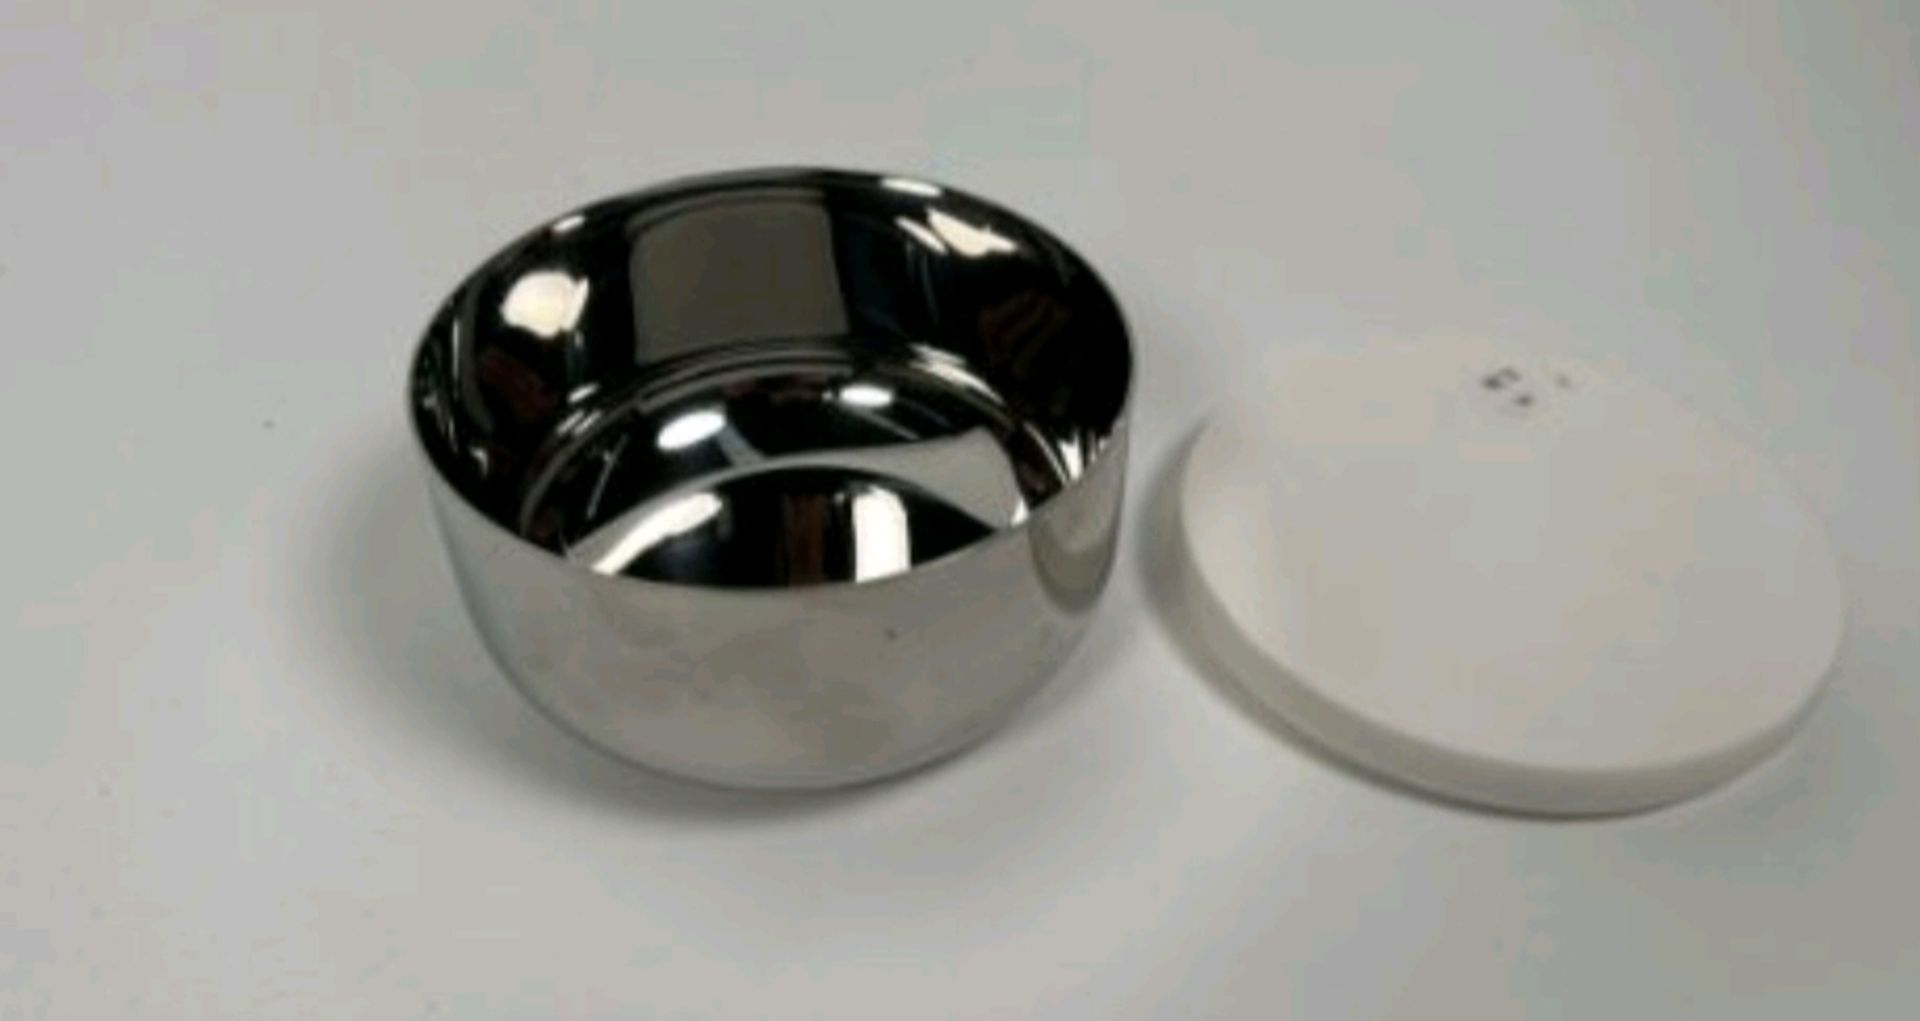 tf Silver Storage Bowl With Marble Lid